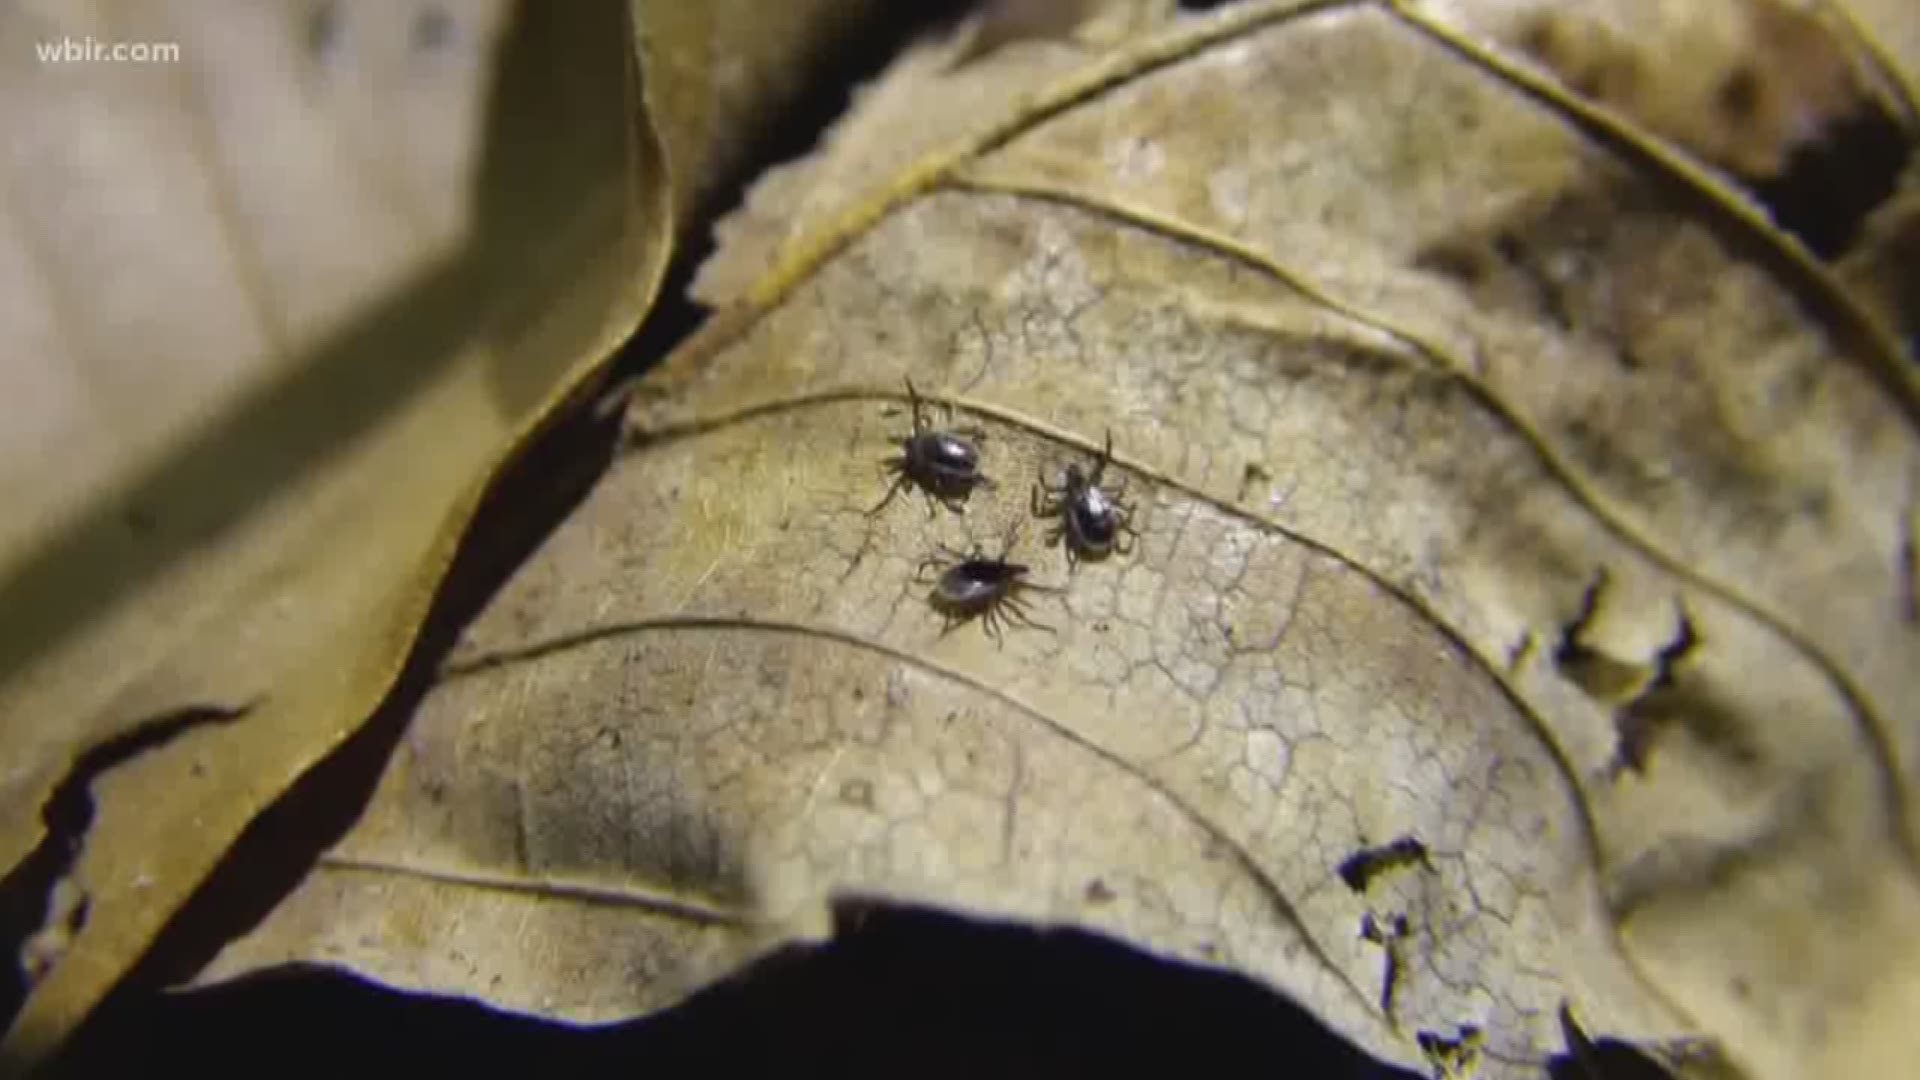 Whether you're hiking in the Smoky Mountains or just walking on the Knoxville Greenway, you could soon see many types of ticks outside but there are only certain ones you need to be on the lookout for this spring in East Tennessee.